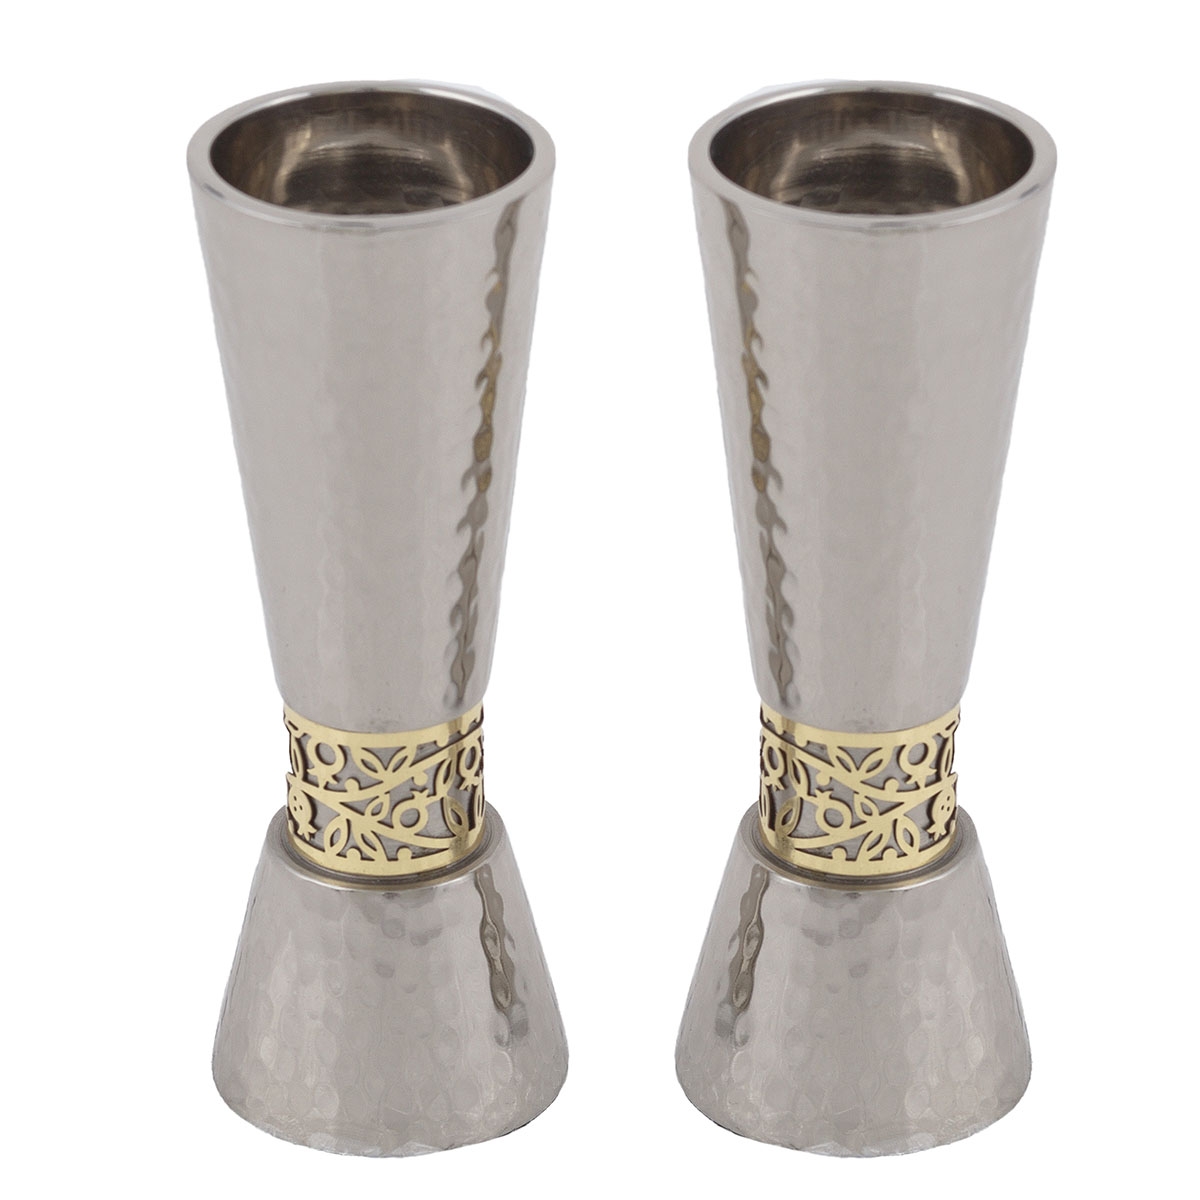 Yair Emanuel Hammered Anodized Aluminum Pomegranate Candlesticks – Silver and Gold   - 1